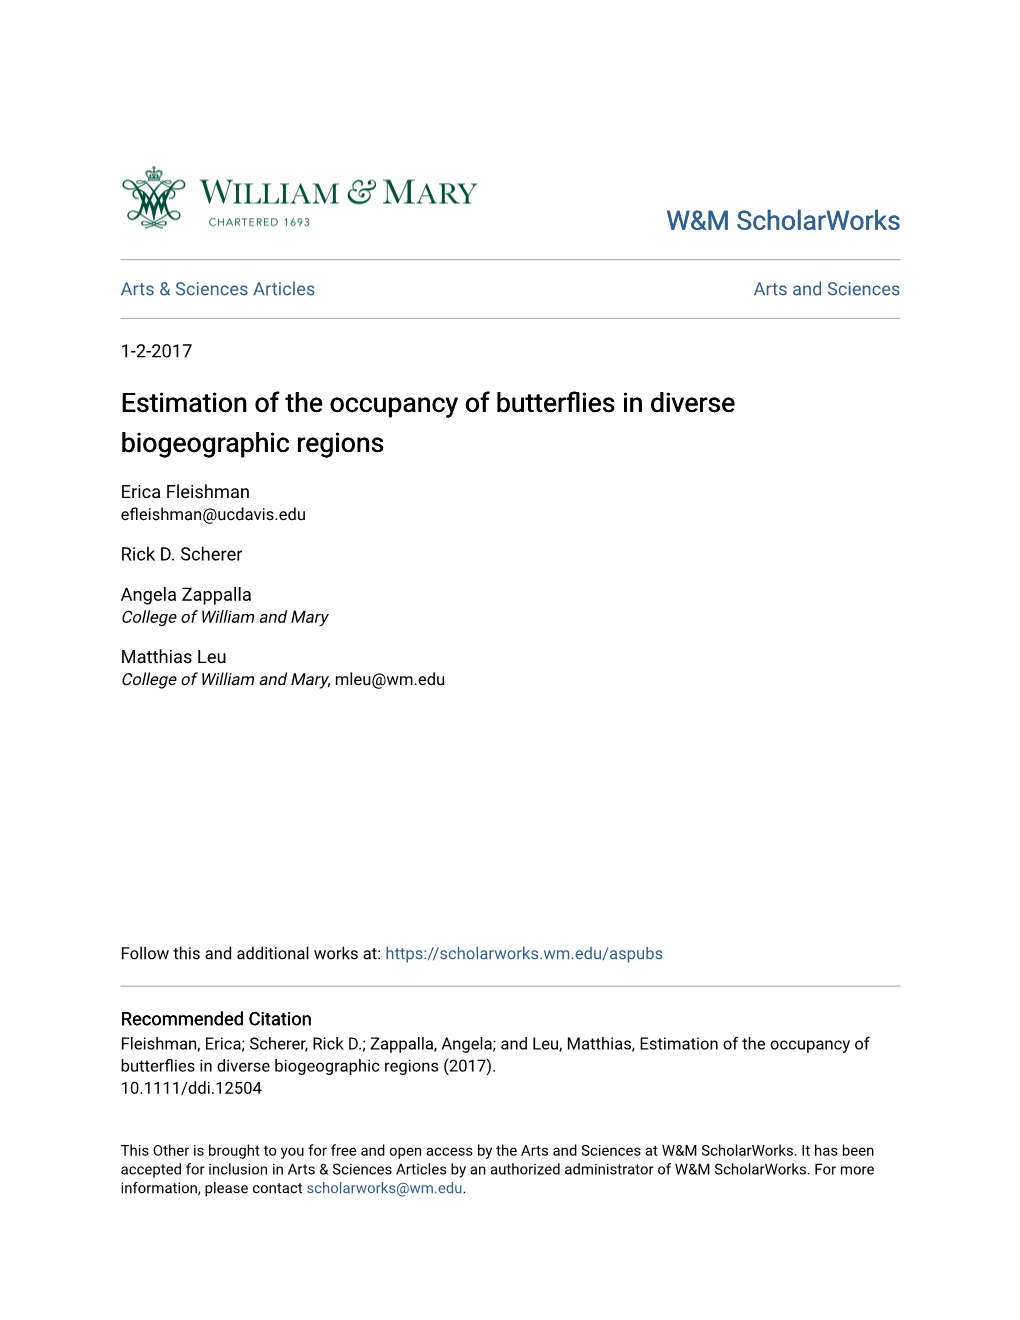 Estimation of the Occupancy of Butterflies in Diverse Biogeographic Regions